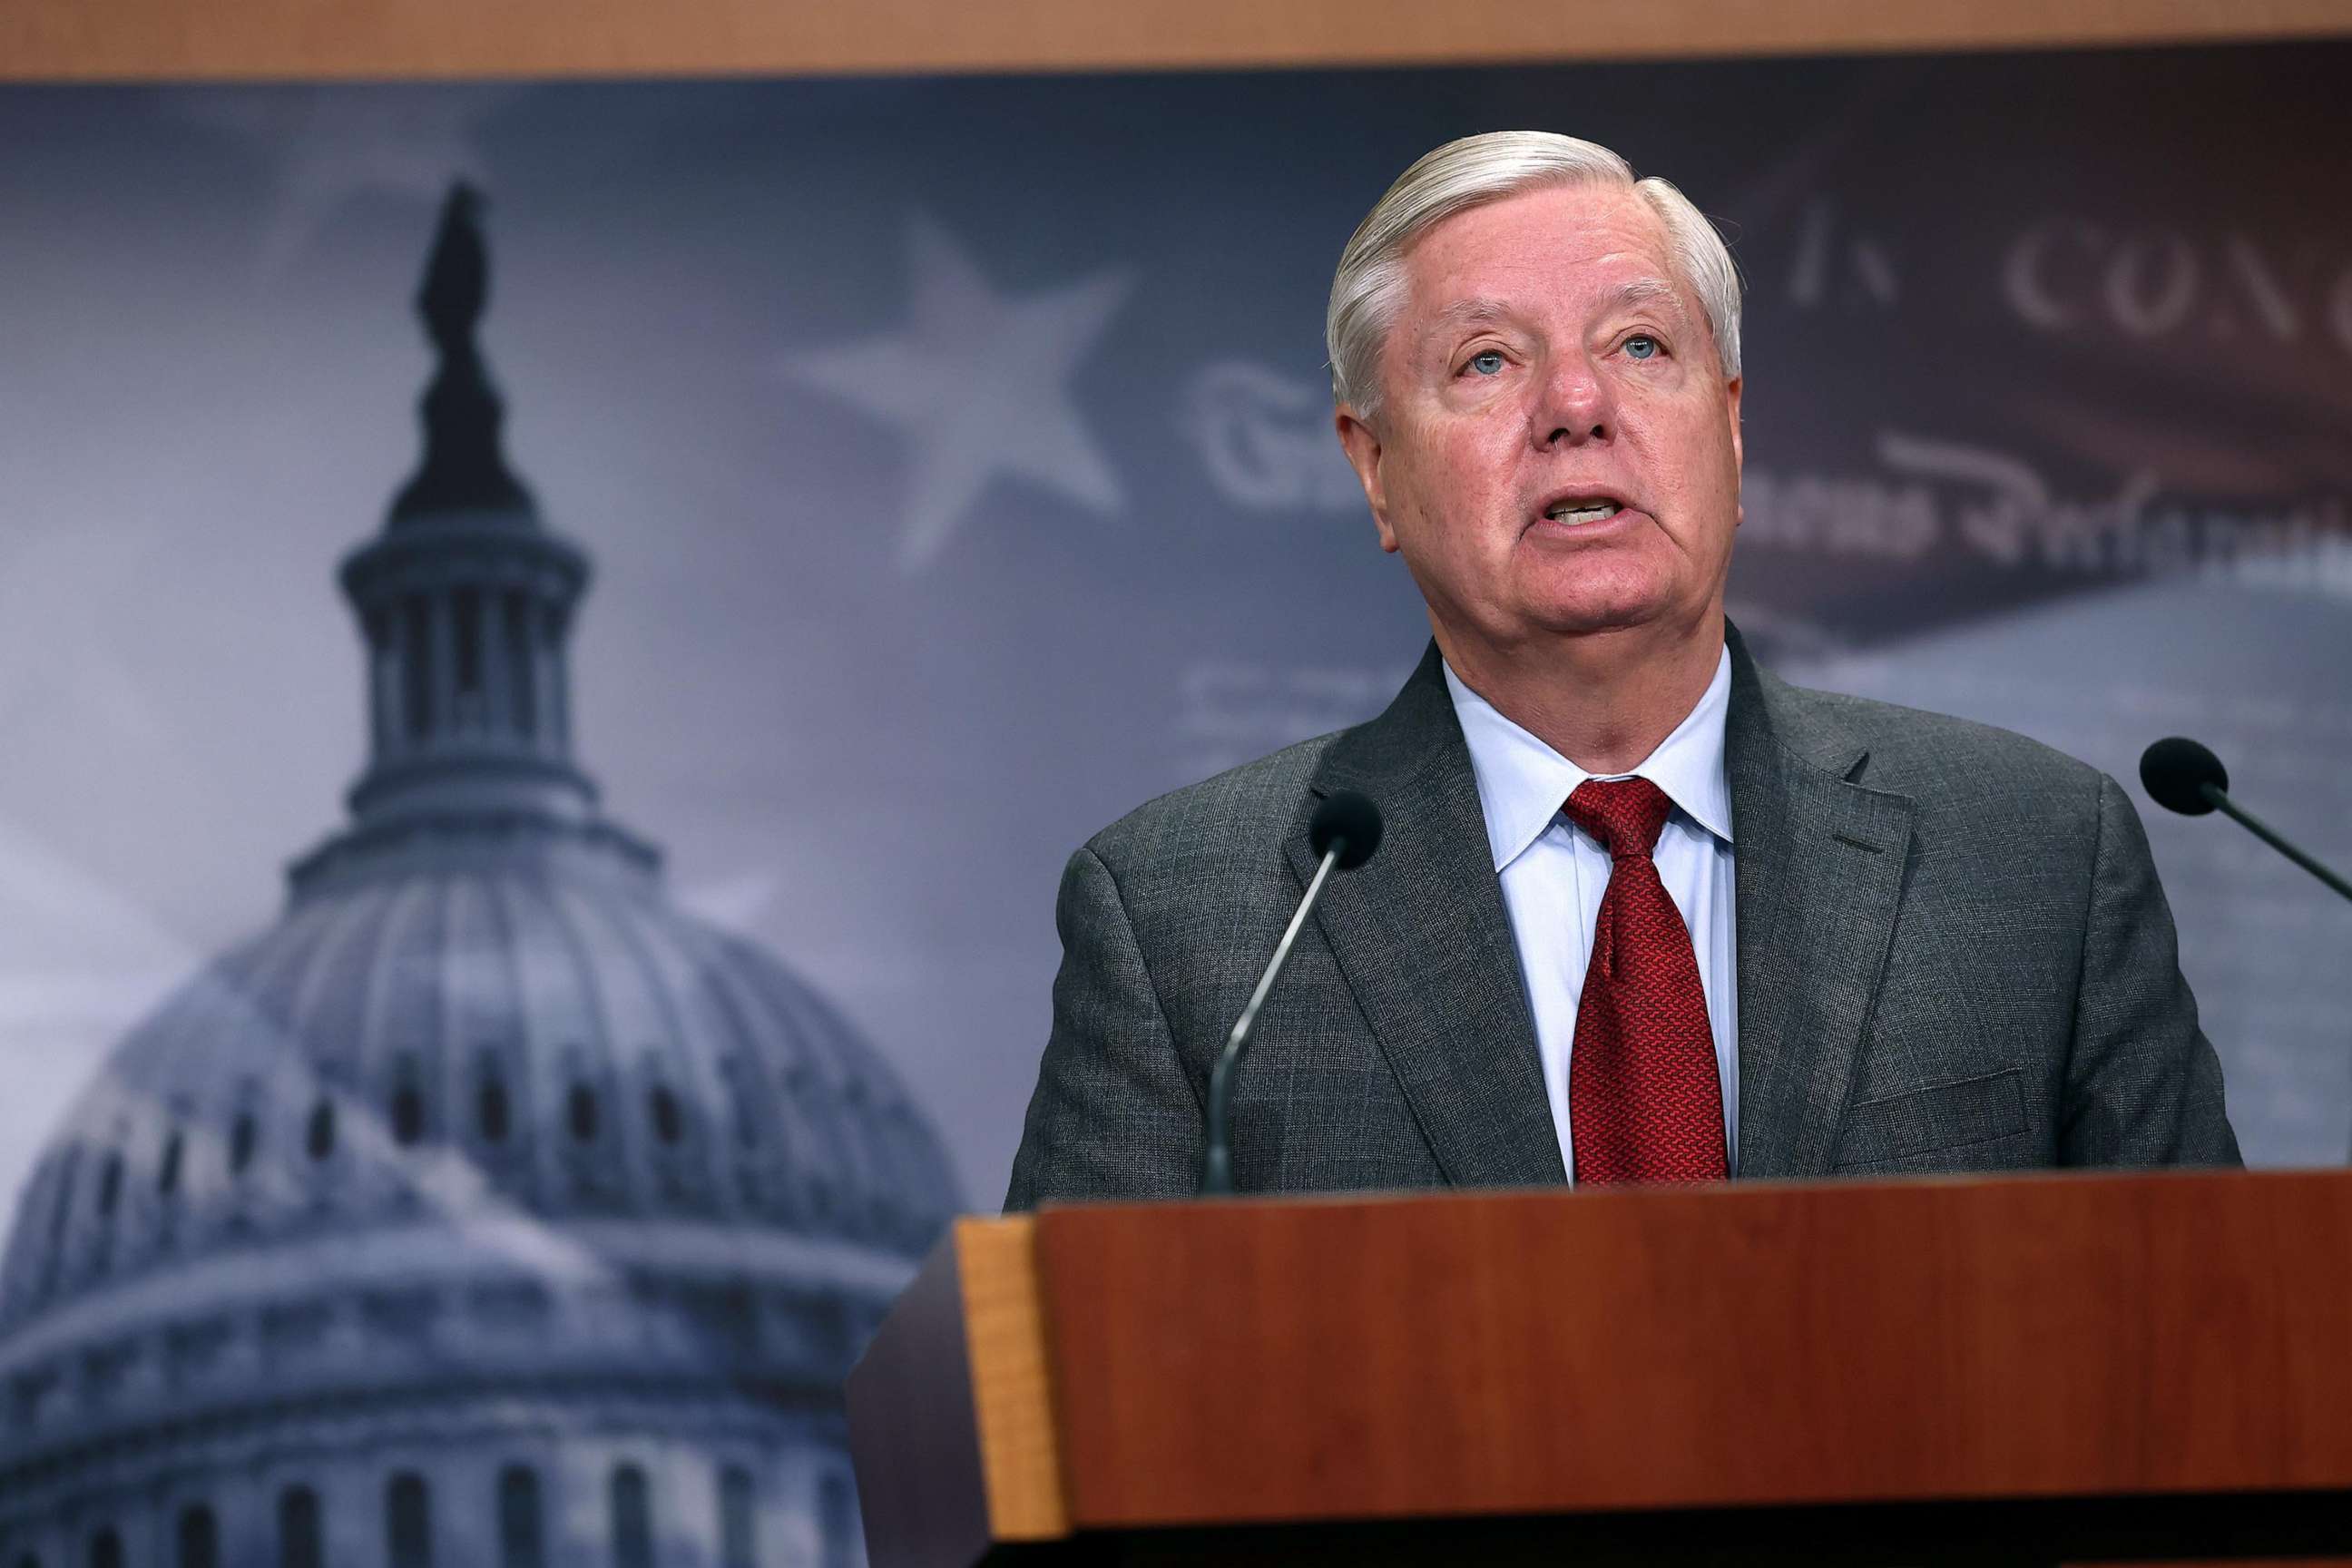 PHOTO: In this May 3, 2023, file photo, Sen. Lindsey Graham speaks in Washington, D.C.